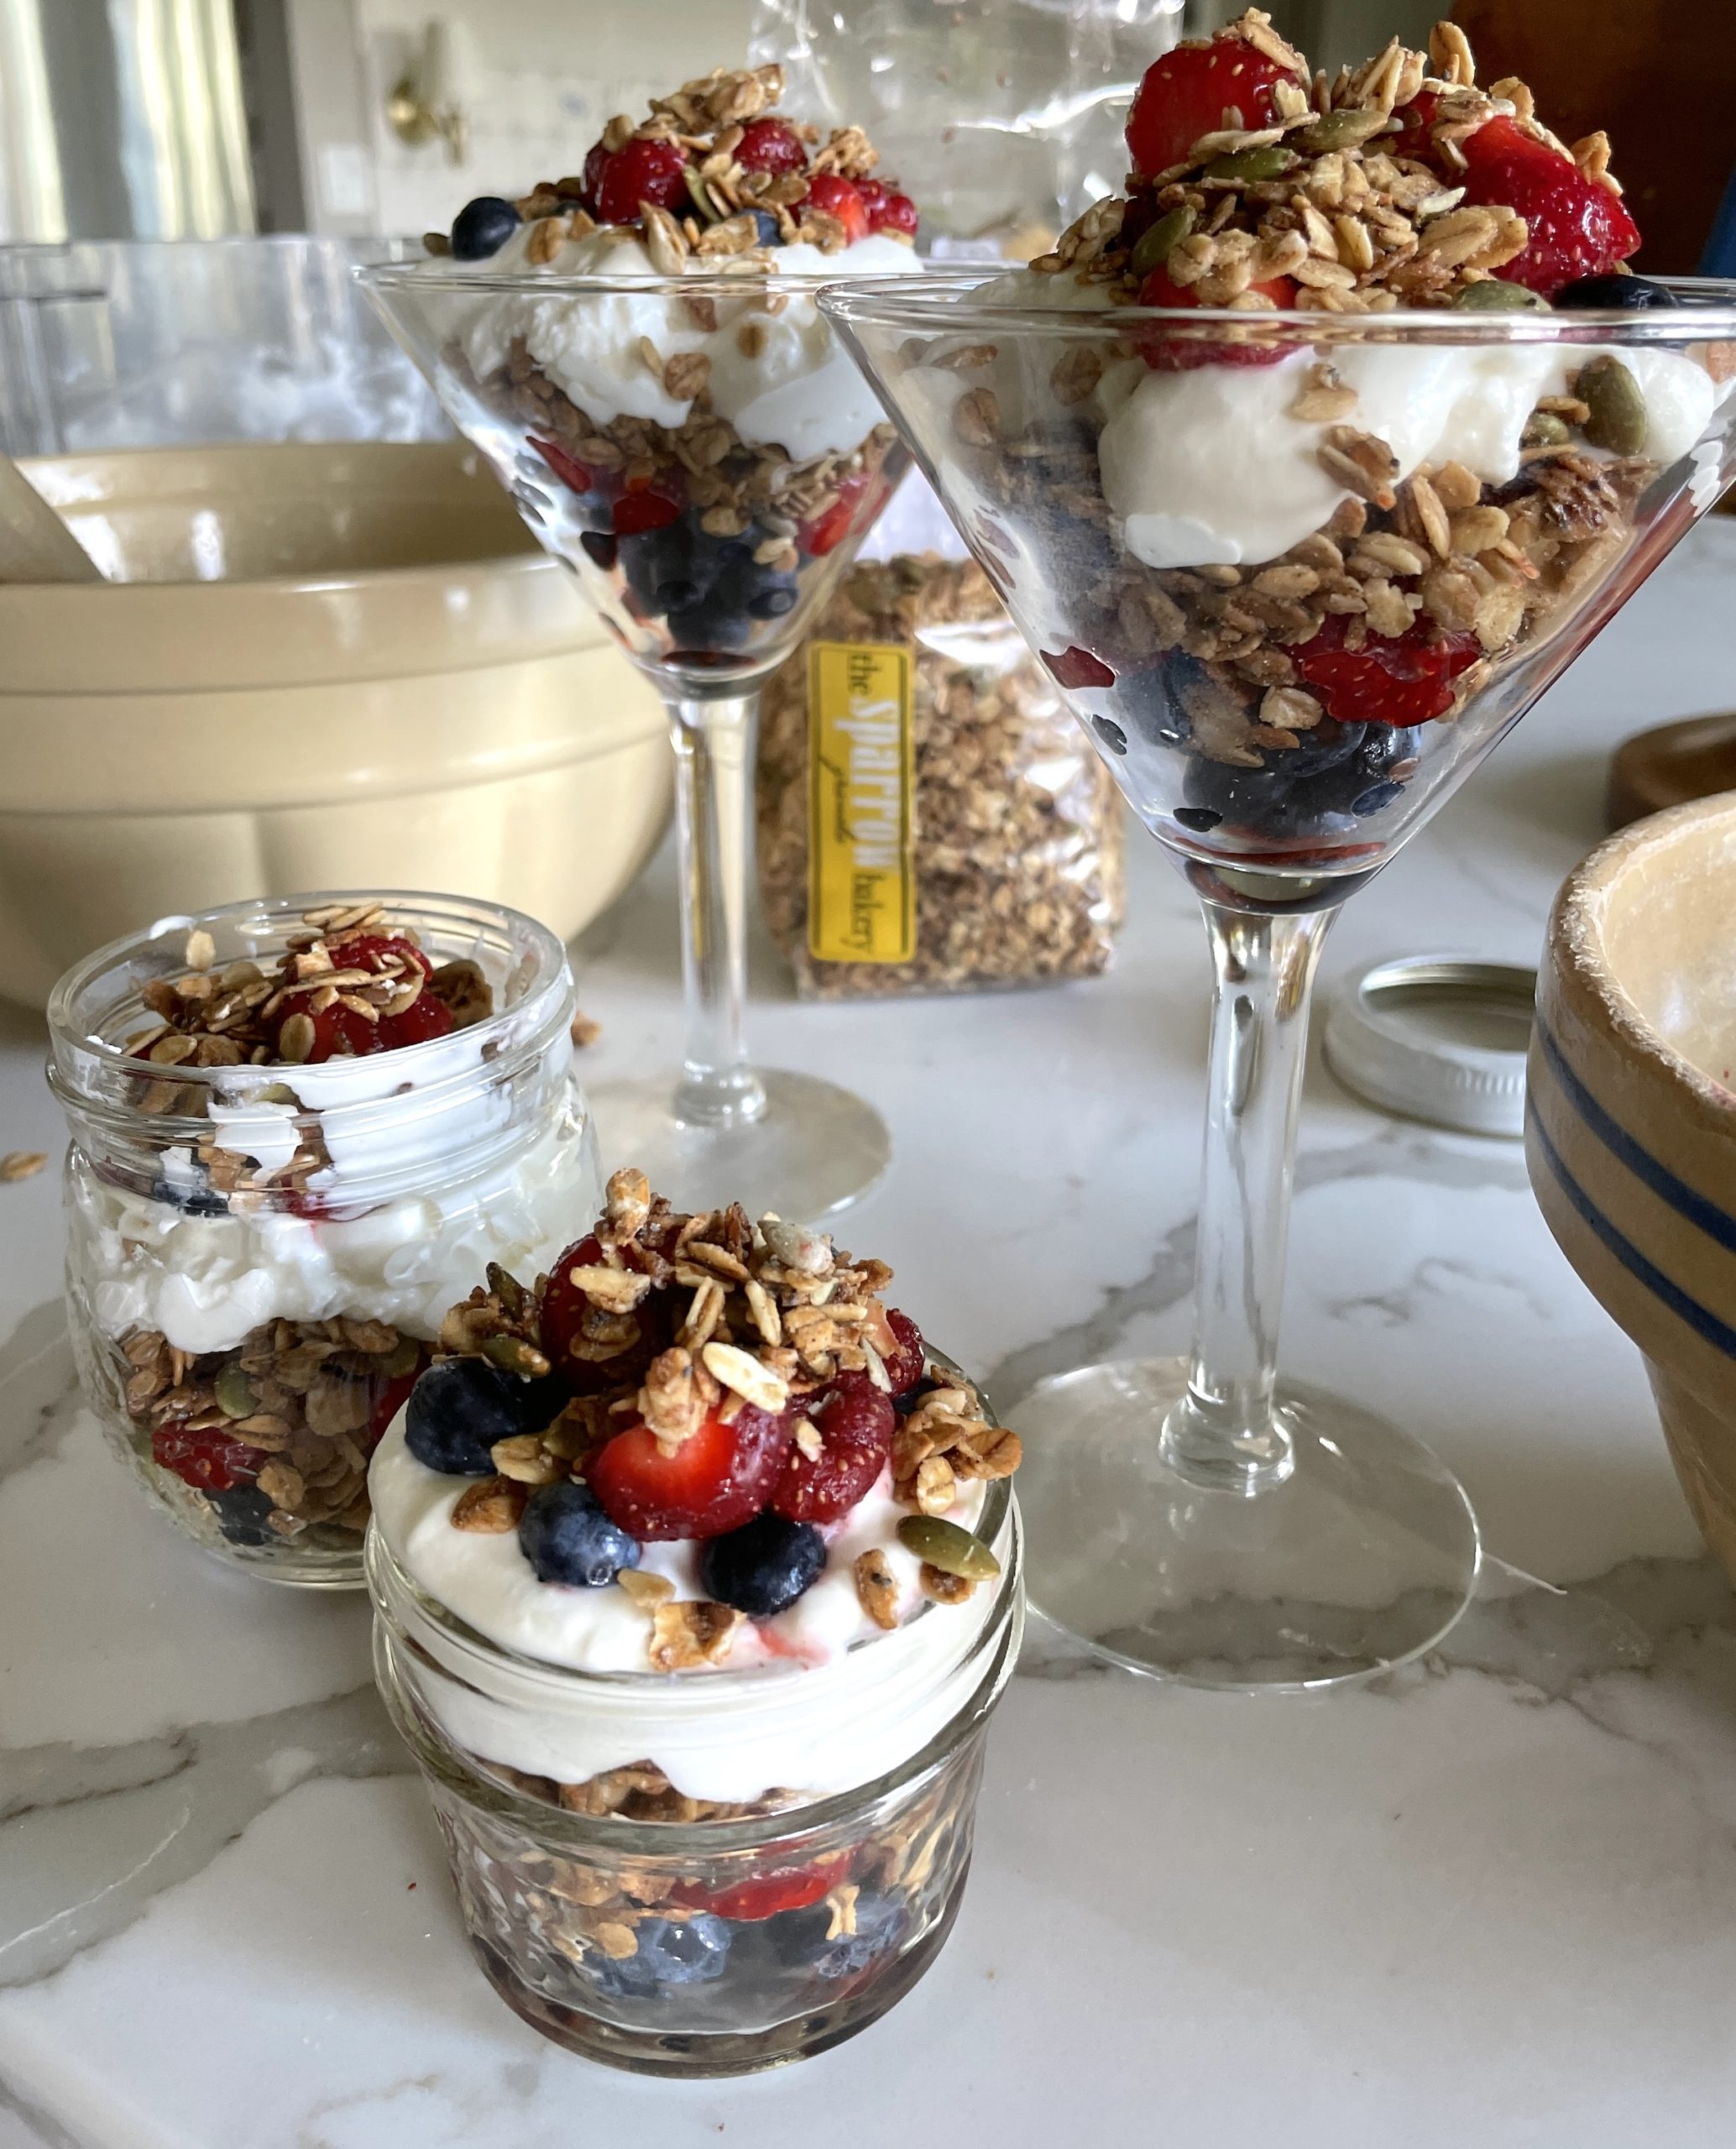 A Simple Summer Dessert: Homemade Ricotta Mousse with Fresh Berries